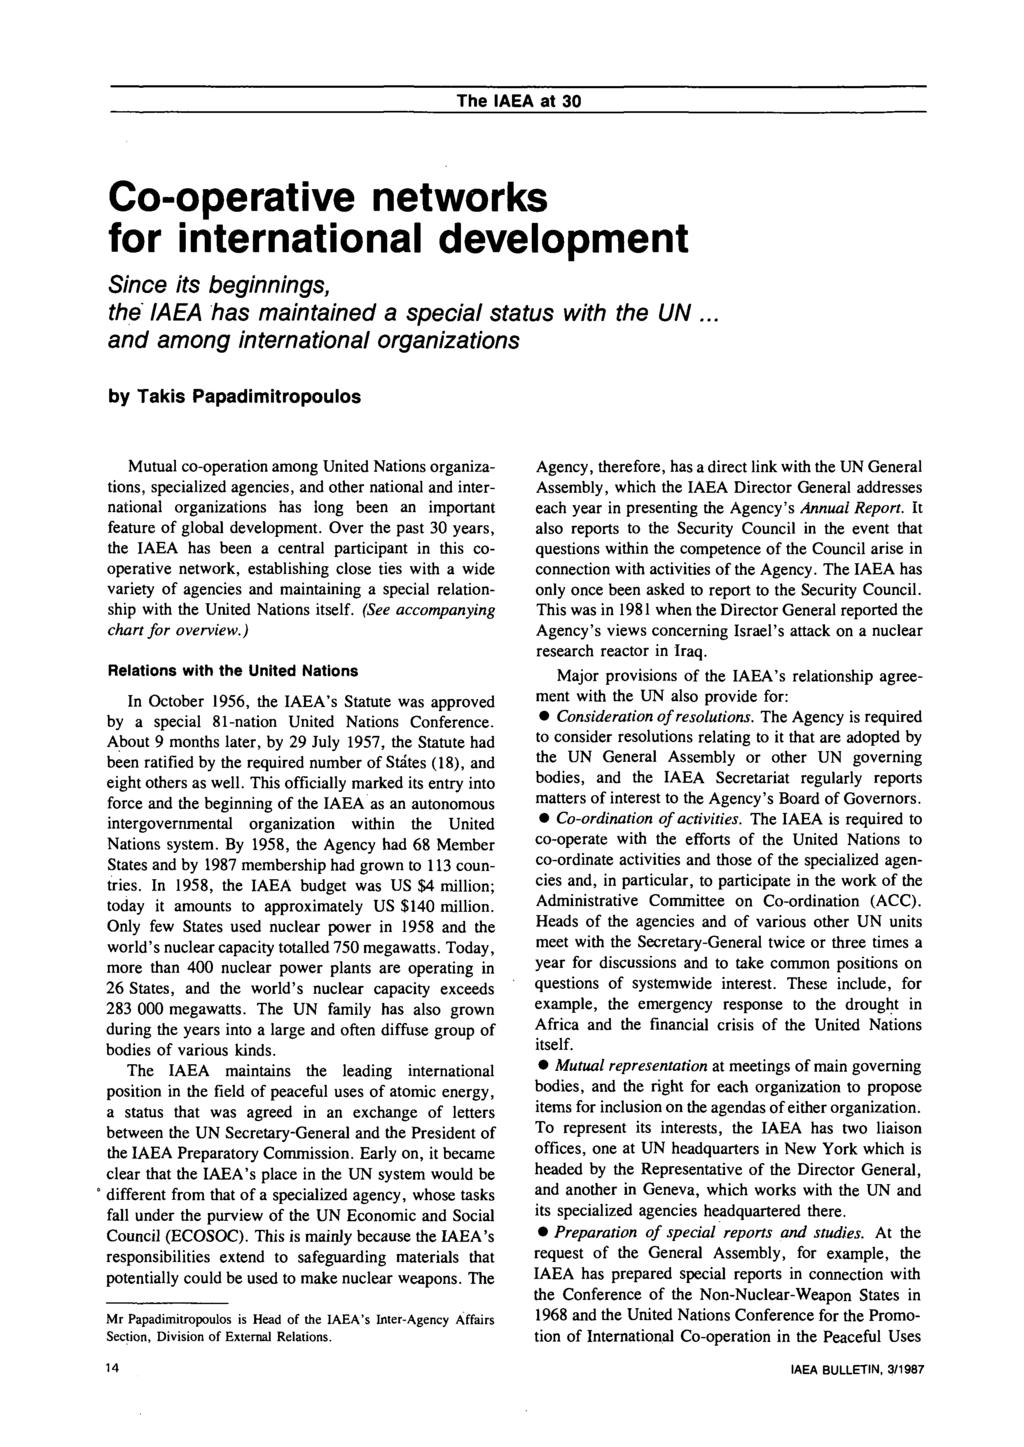 Co-operative networks for international development Since its beginnings, the IAEA has maintained a special status with the UN and among international organizations by Takis Papadimitropoulos Mutual